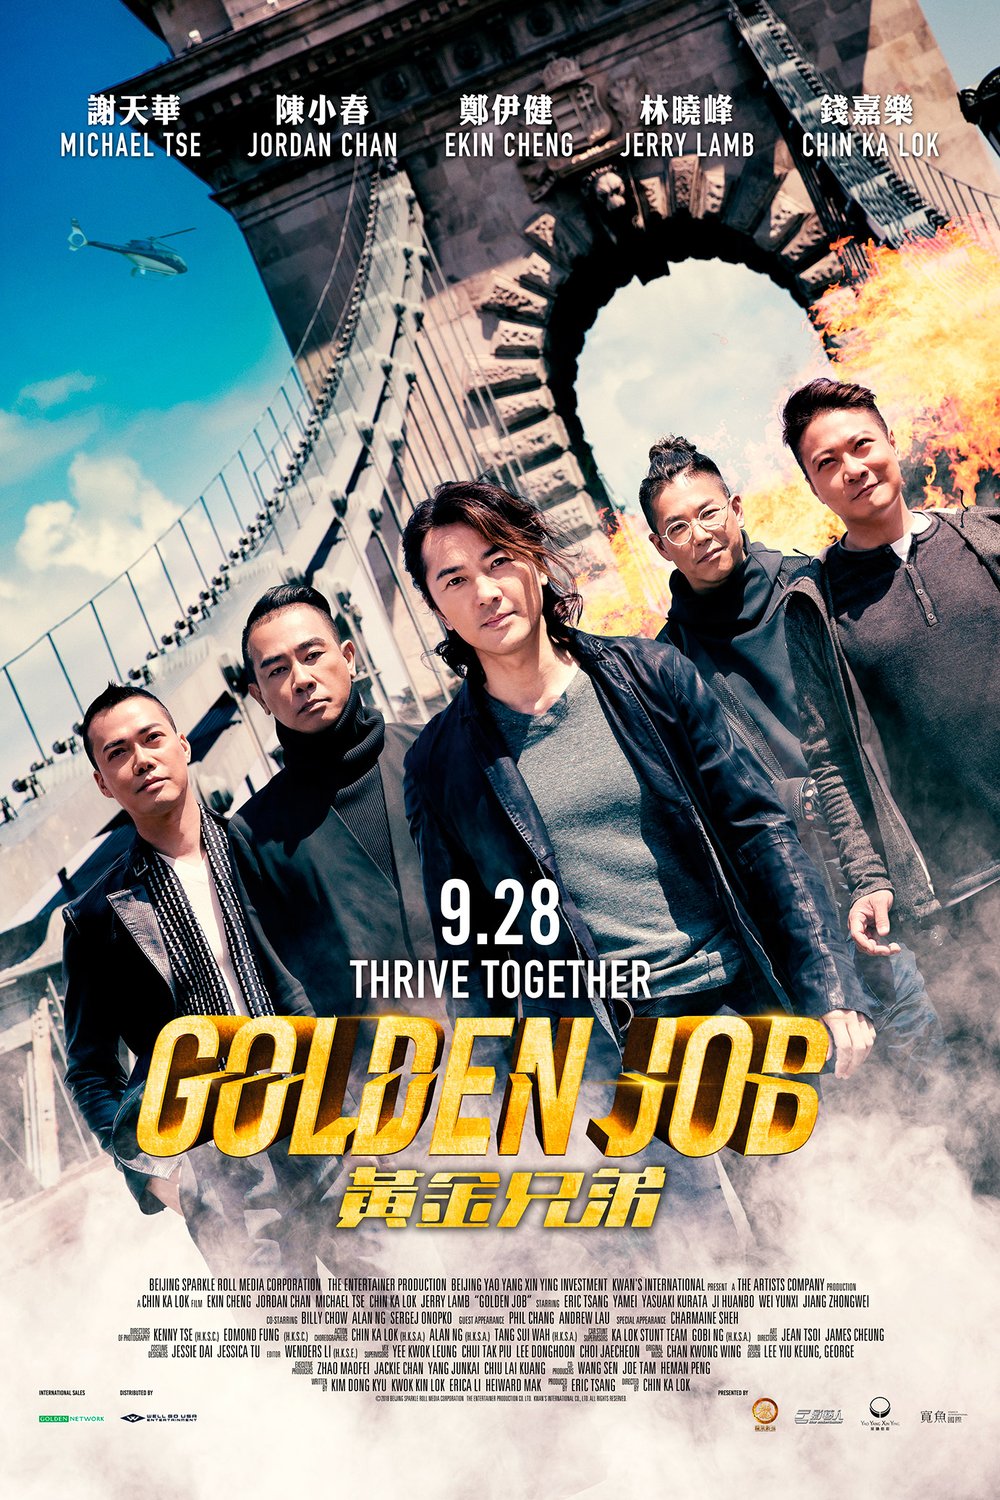 Poster of the movie Golden Job